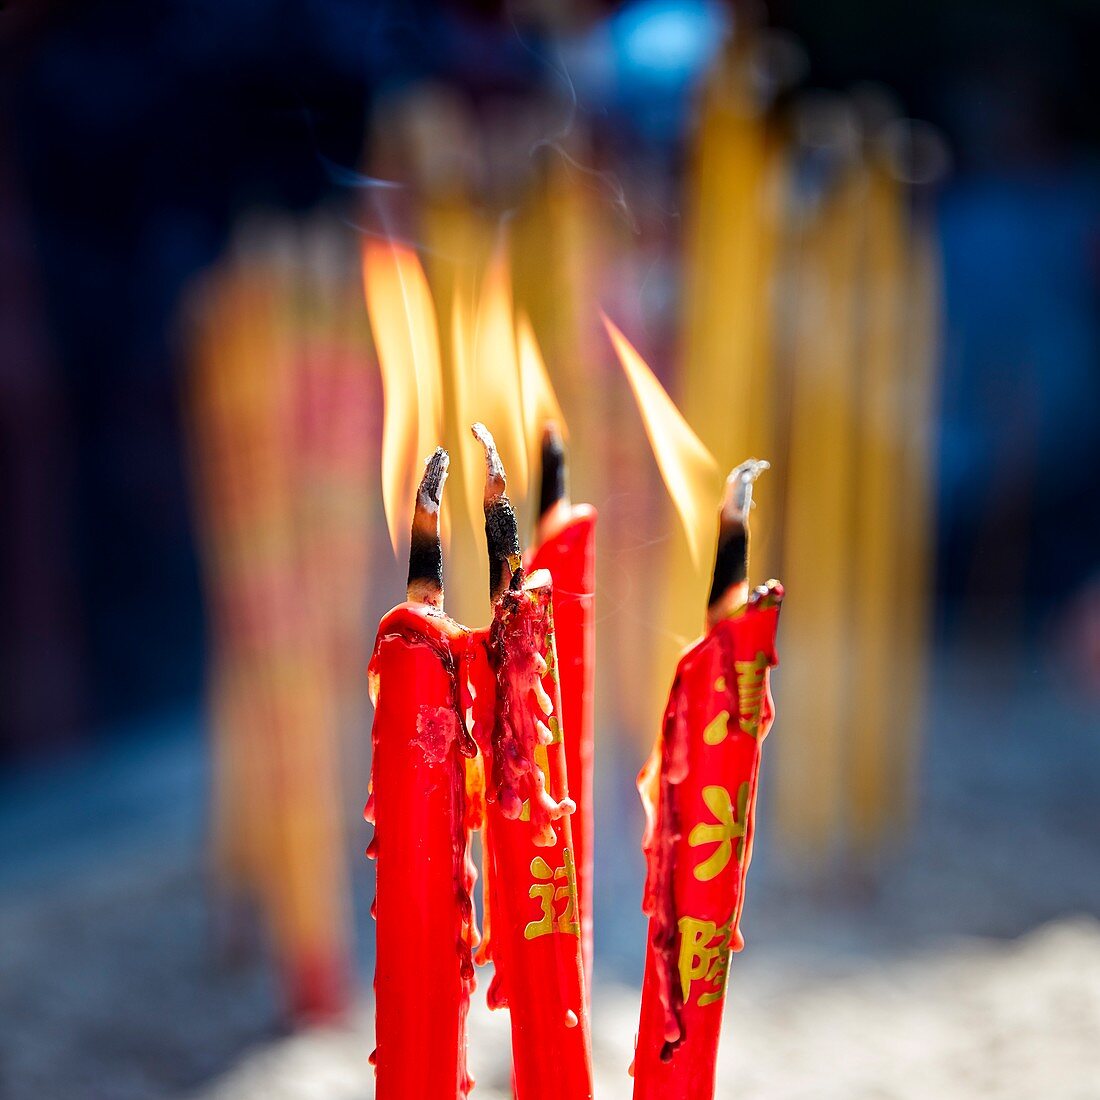 Burning red candles in the A-Ma Temple. Macau, China.